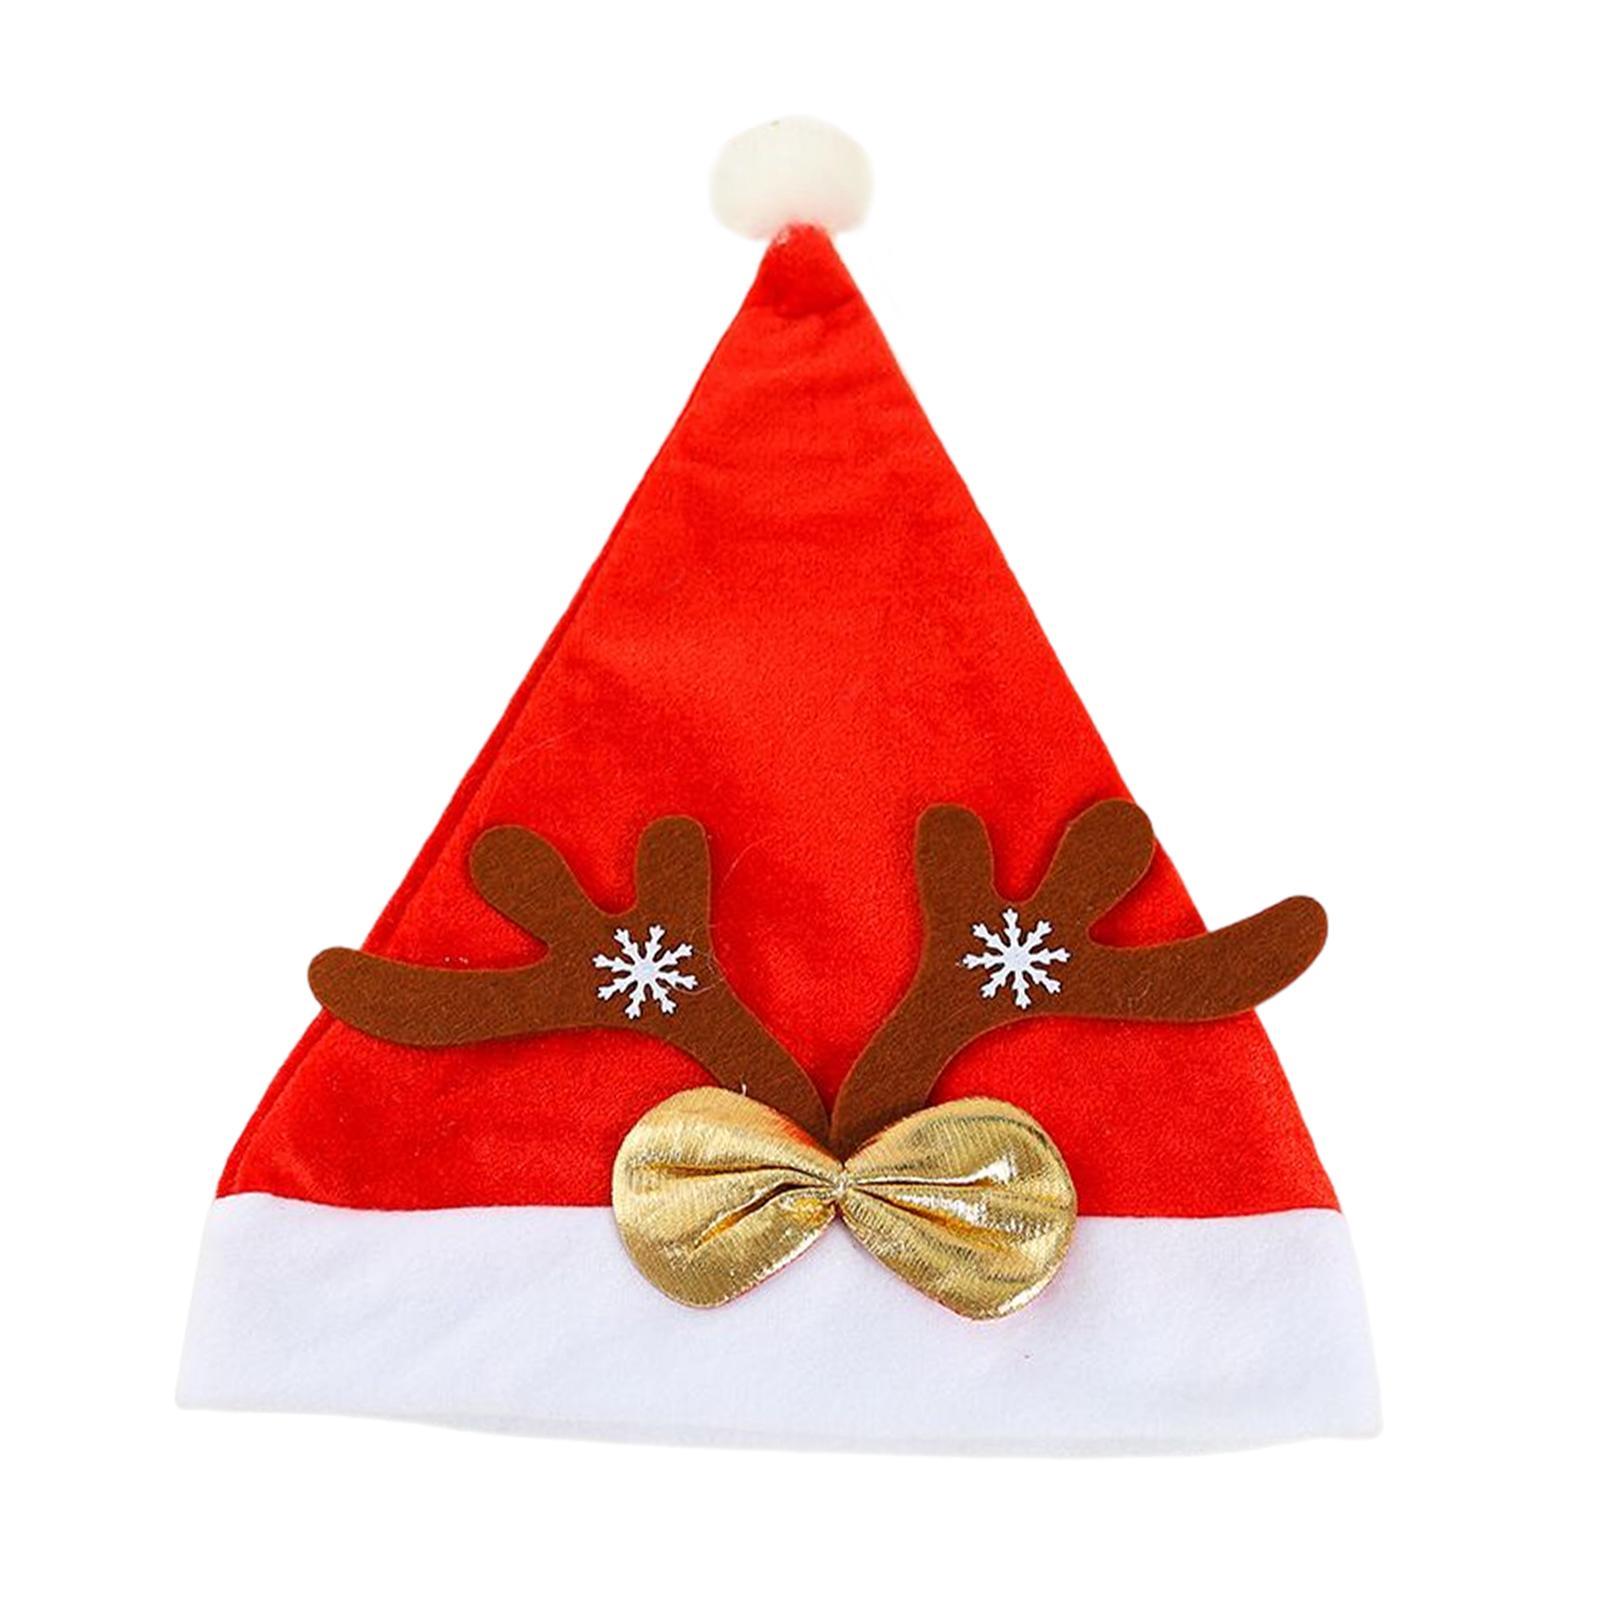 Antler Hat Red Santa Claus Xmas Hat Cap for Masquerade Stage Performance